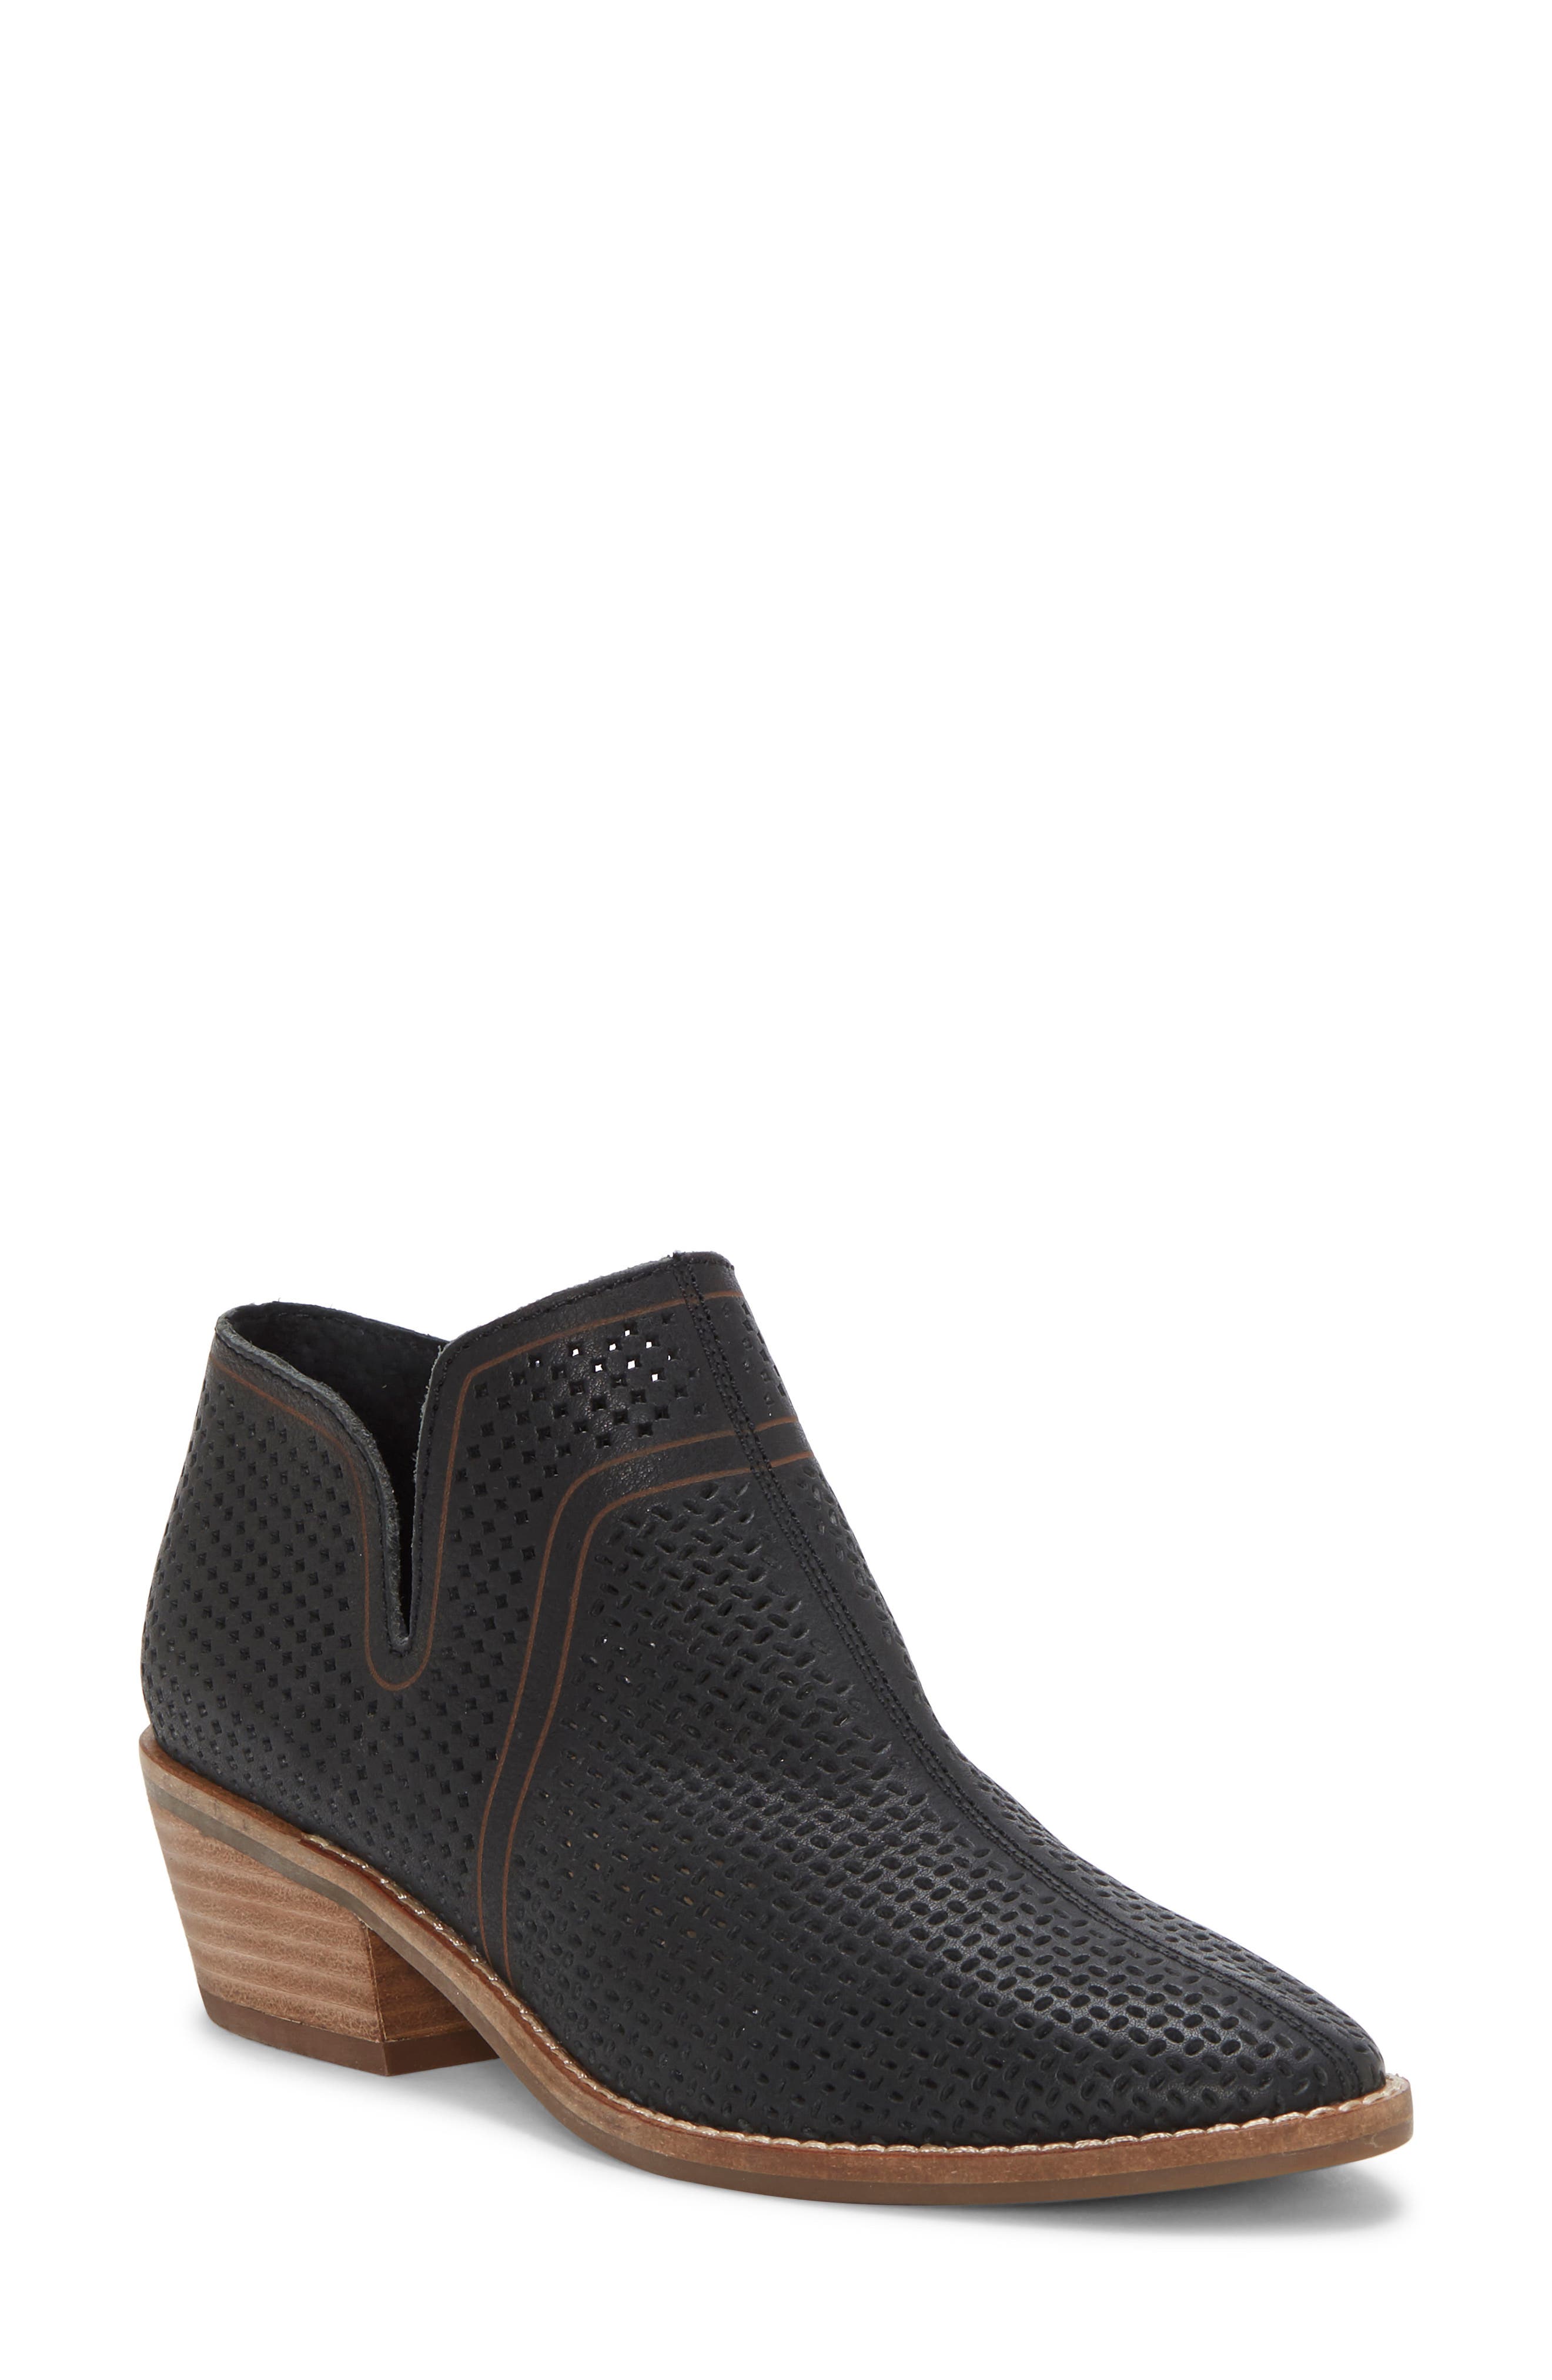 lucky brand perforated basel booties